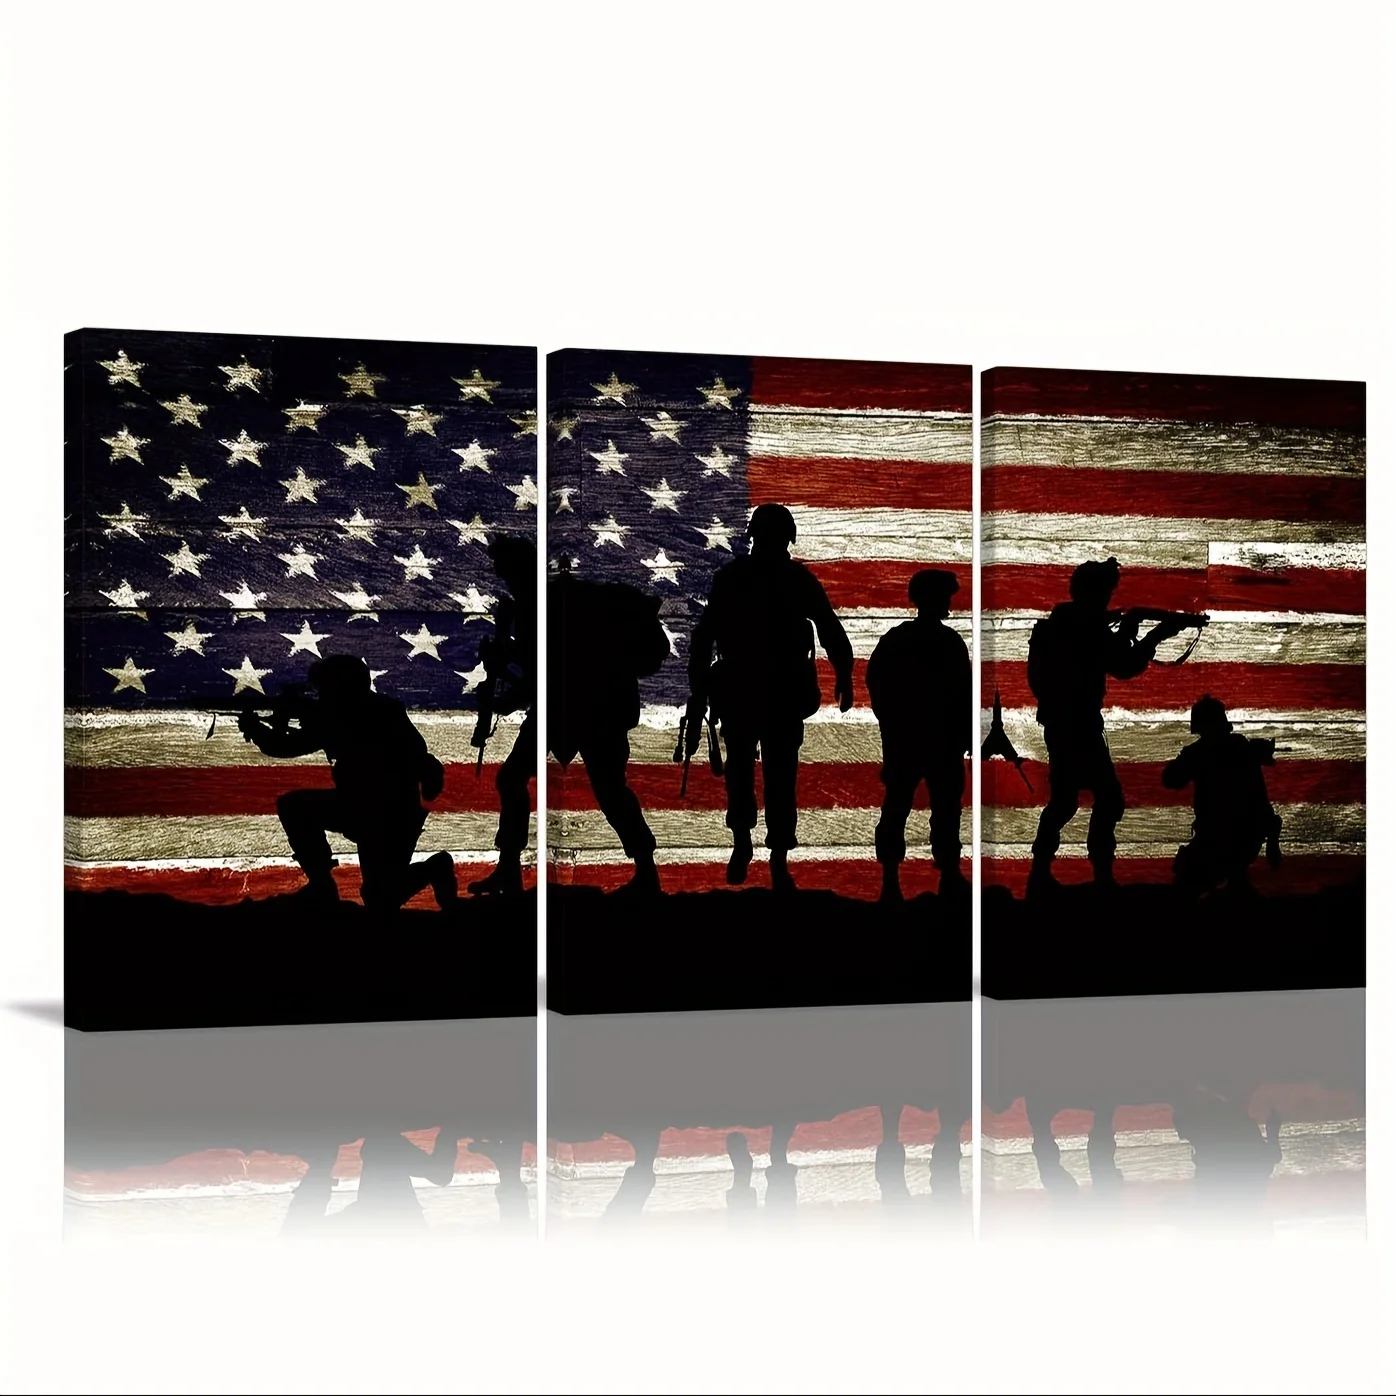 

3pcs Soldier Canvas Wall Art Set, Patriotic Military Silhouette, Independence Day Decor, USA Flag Print, Framed Home Decor, Rea